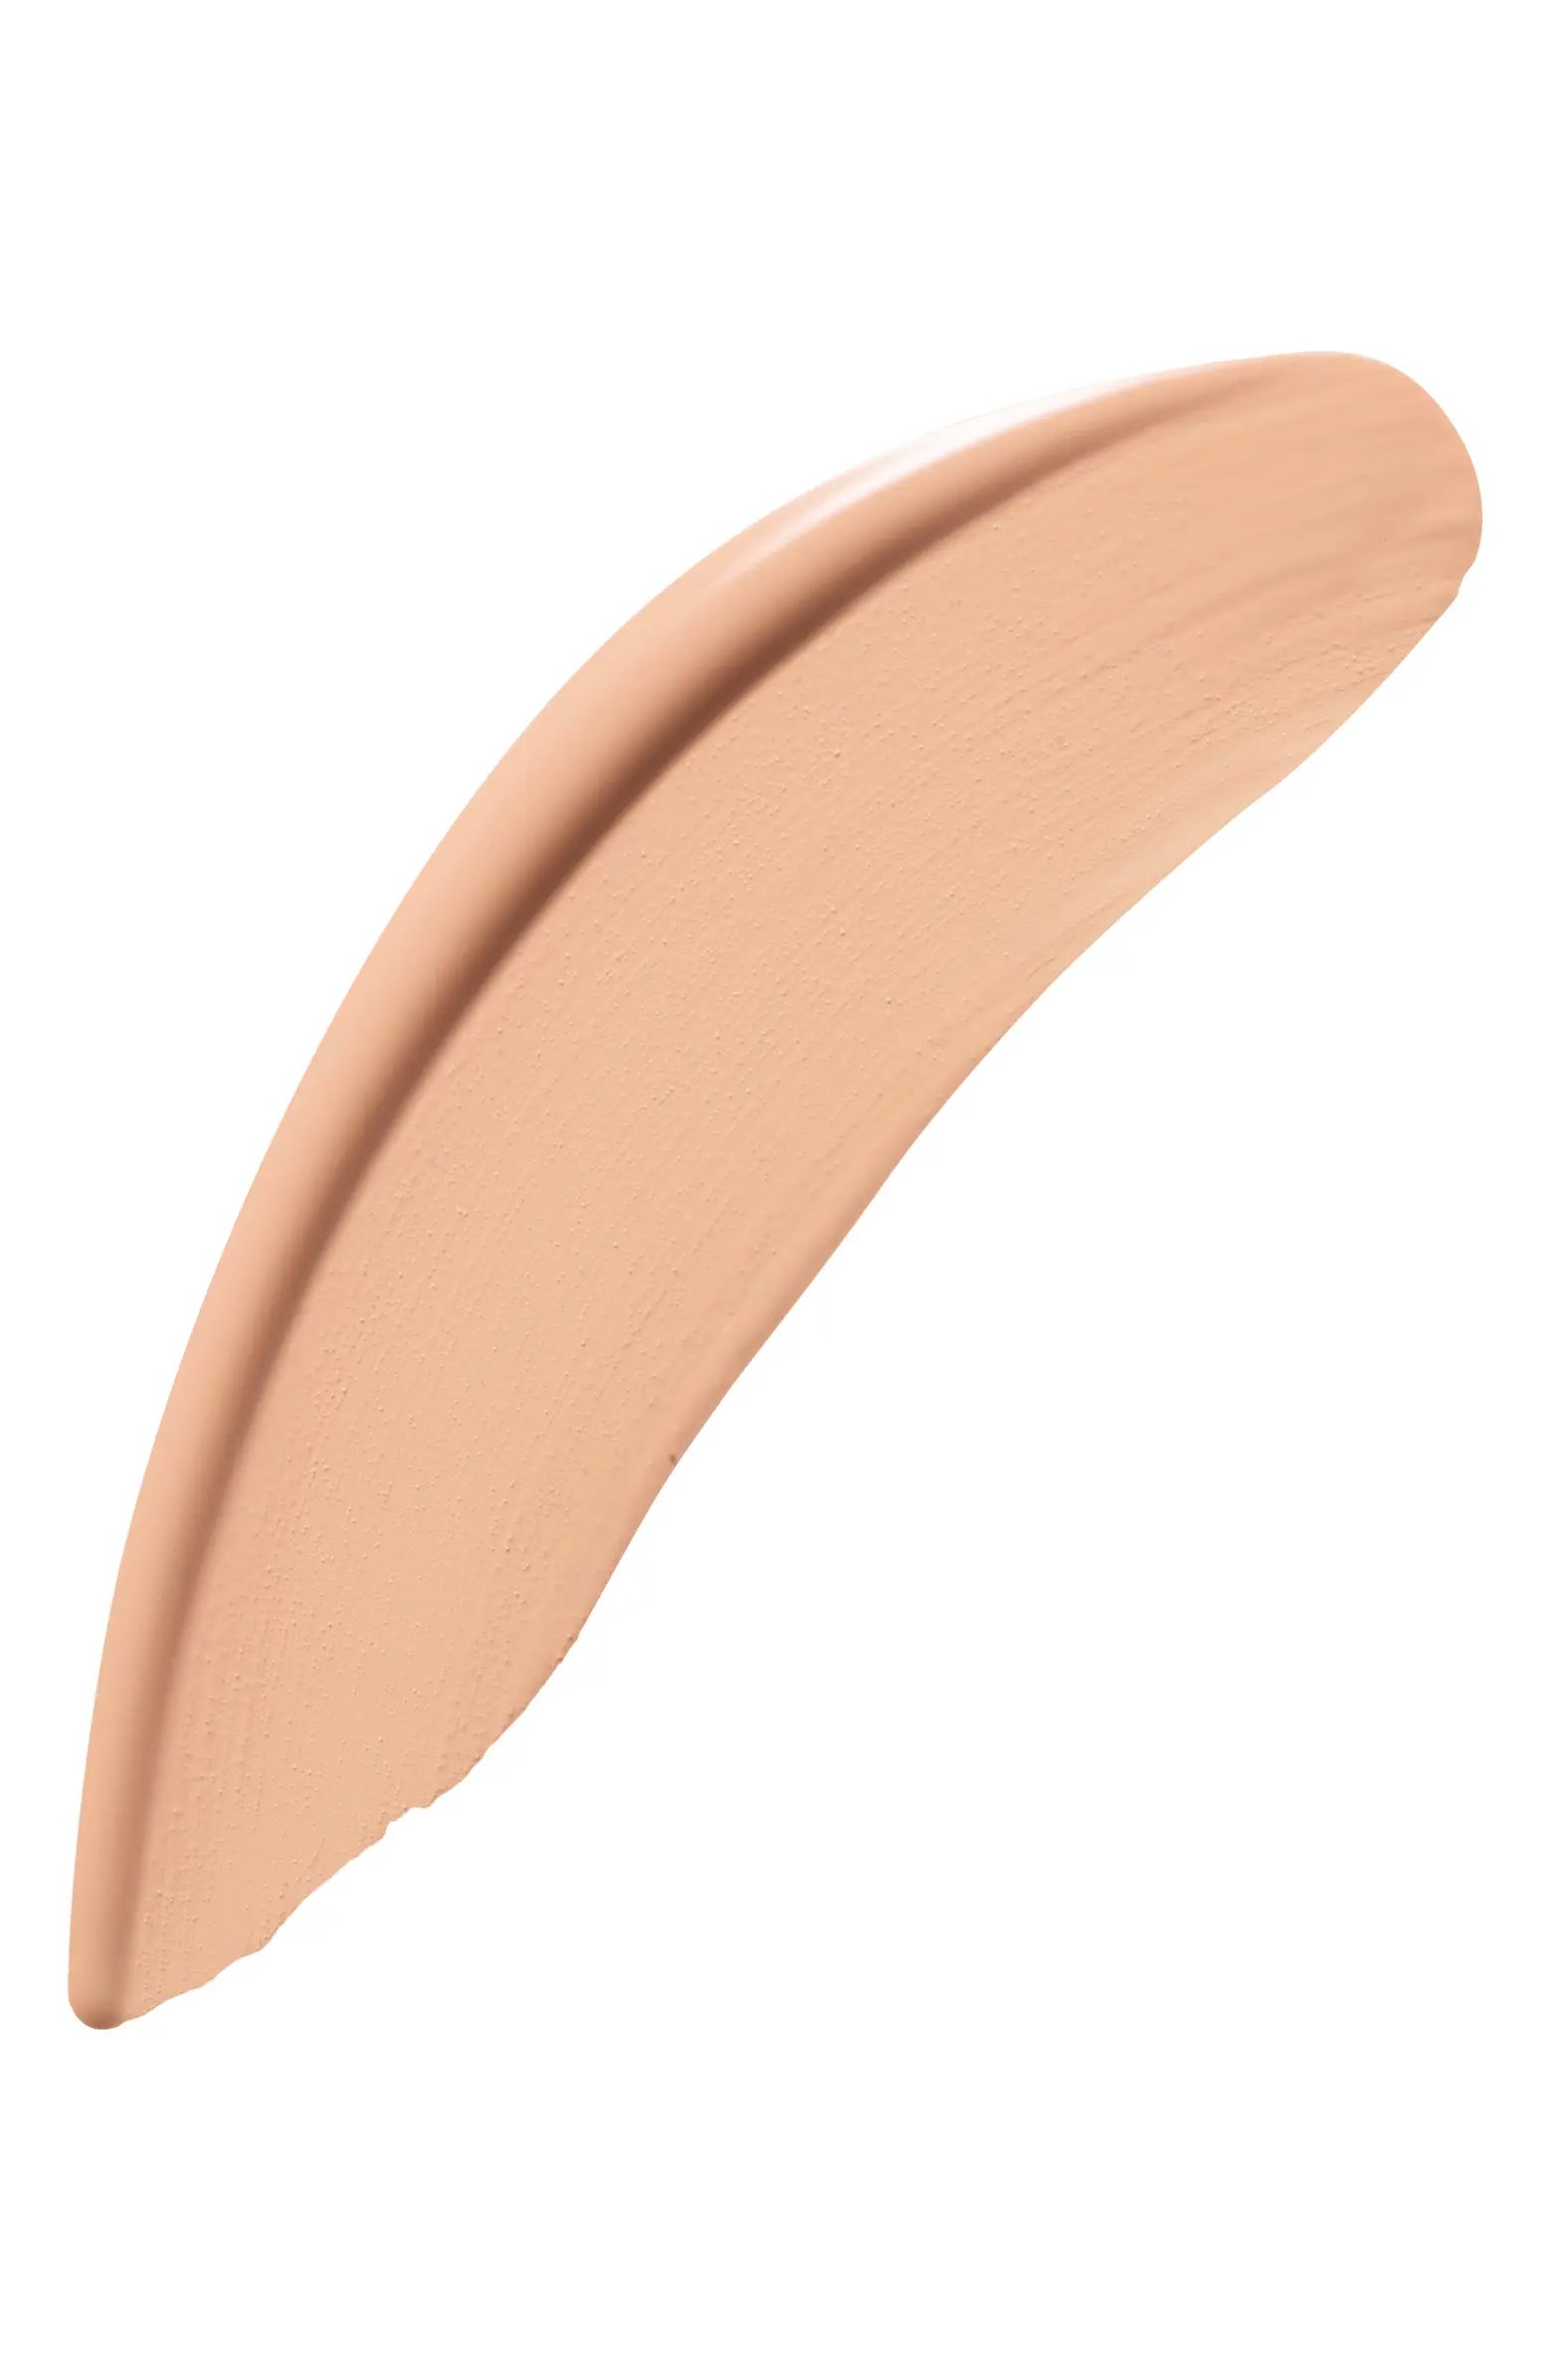 Giorgio Armani Power Fabric Stretchable Full Coverage Concealer | Nordstrom | Nordstrom